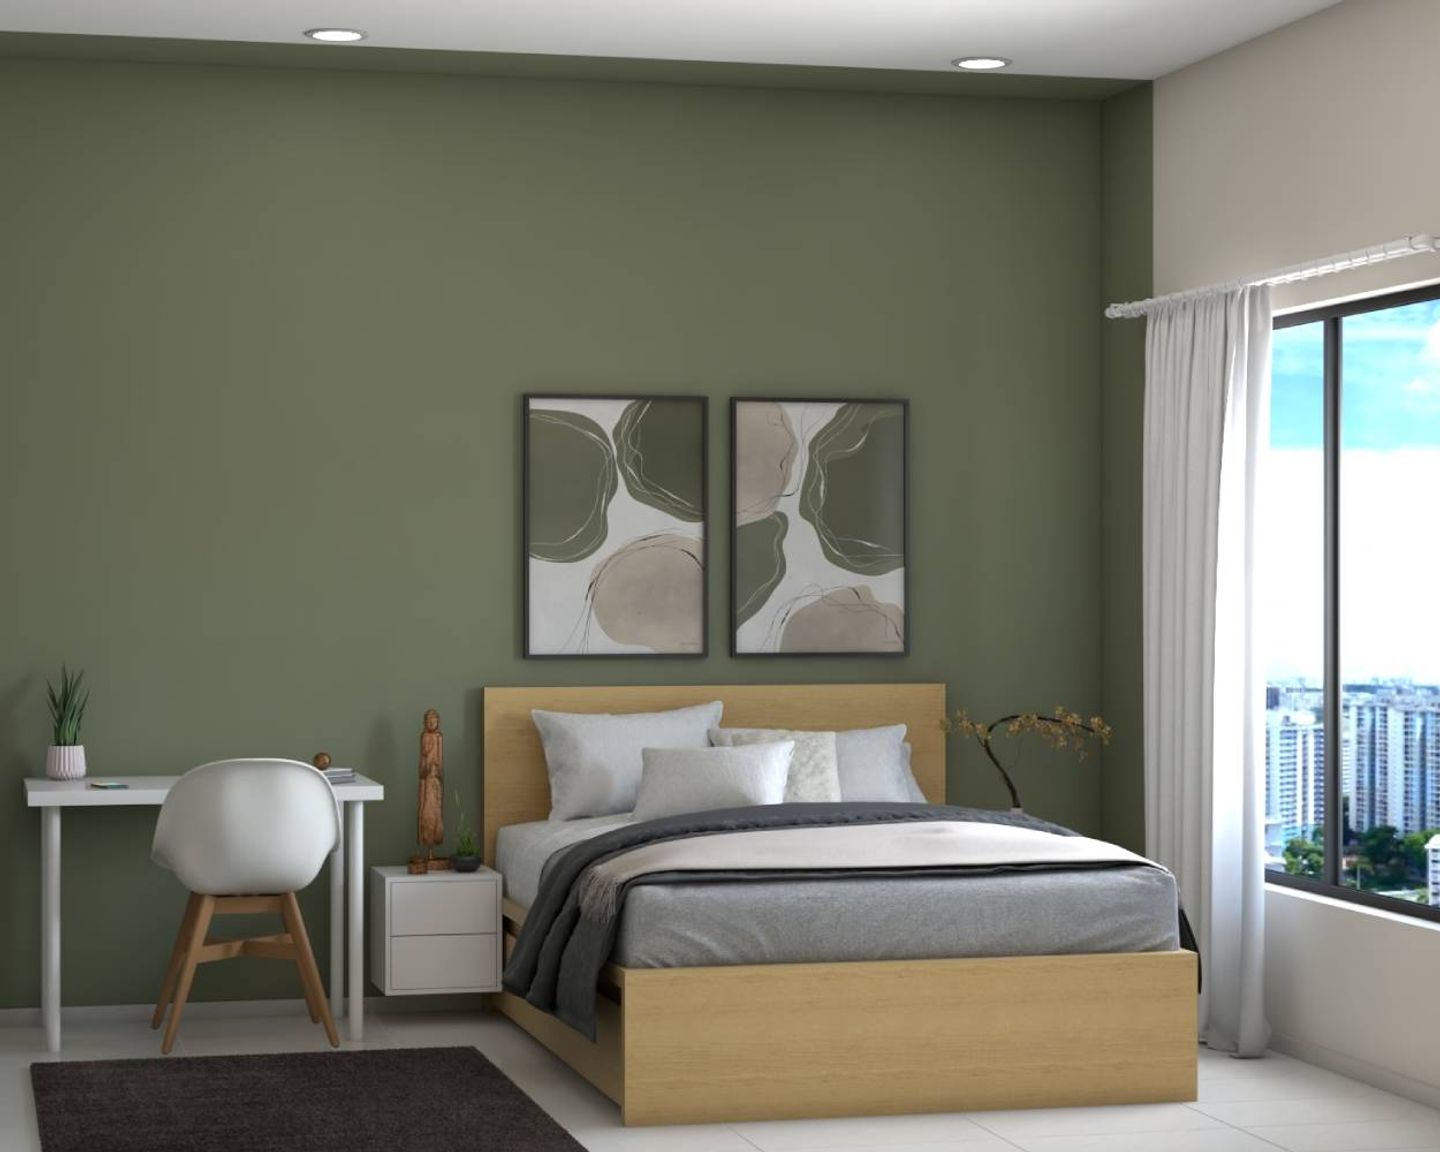 Green Master Bedroom Design With Wooden Bed, White Wall-Mounted Side Table And White Study Table - Livspace